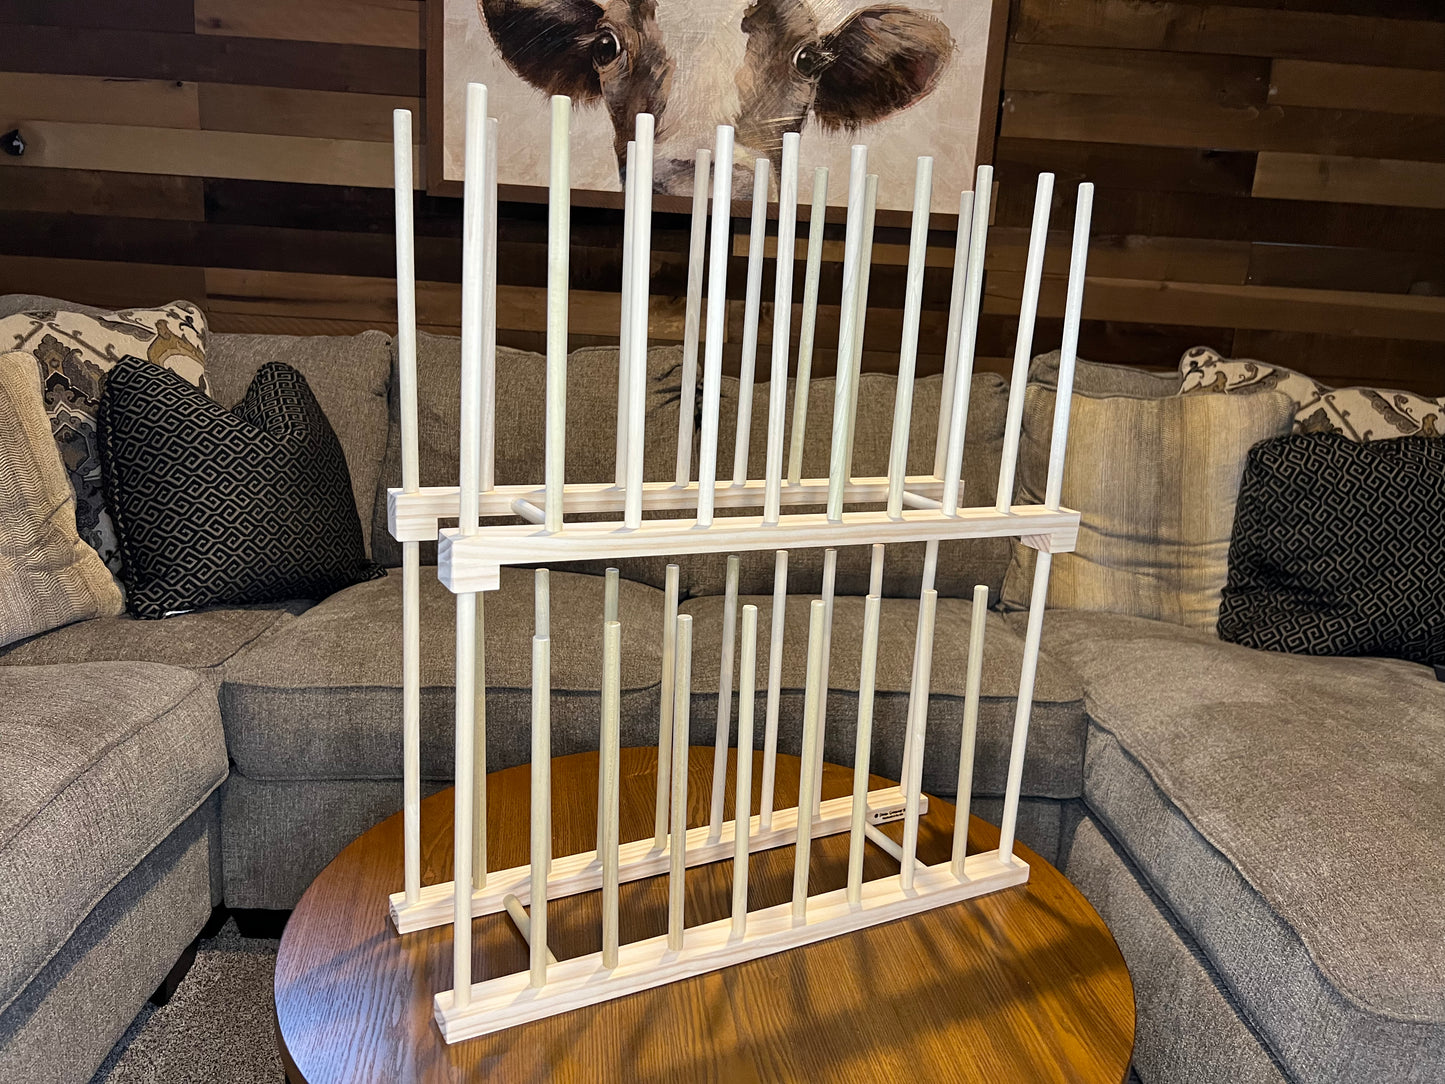 Small Two Tier Art Storage Rack - 24" long x 8" wide